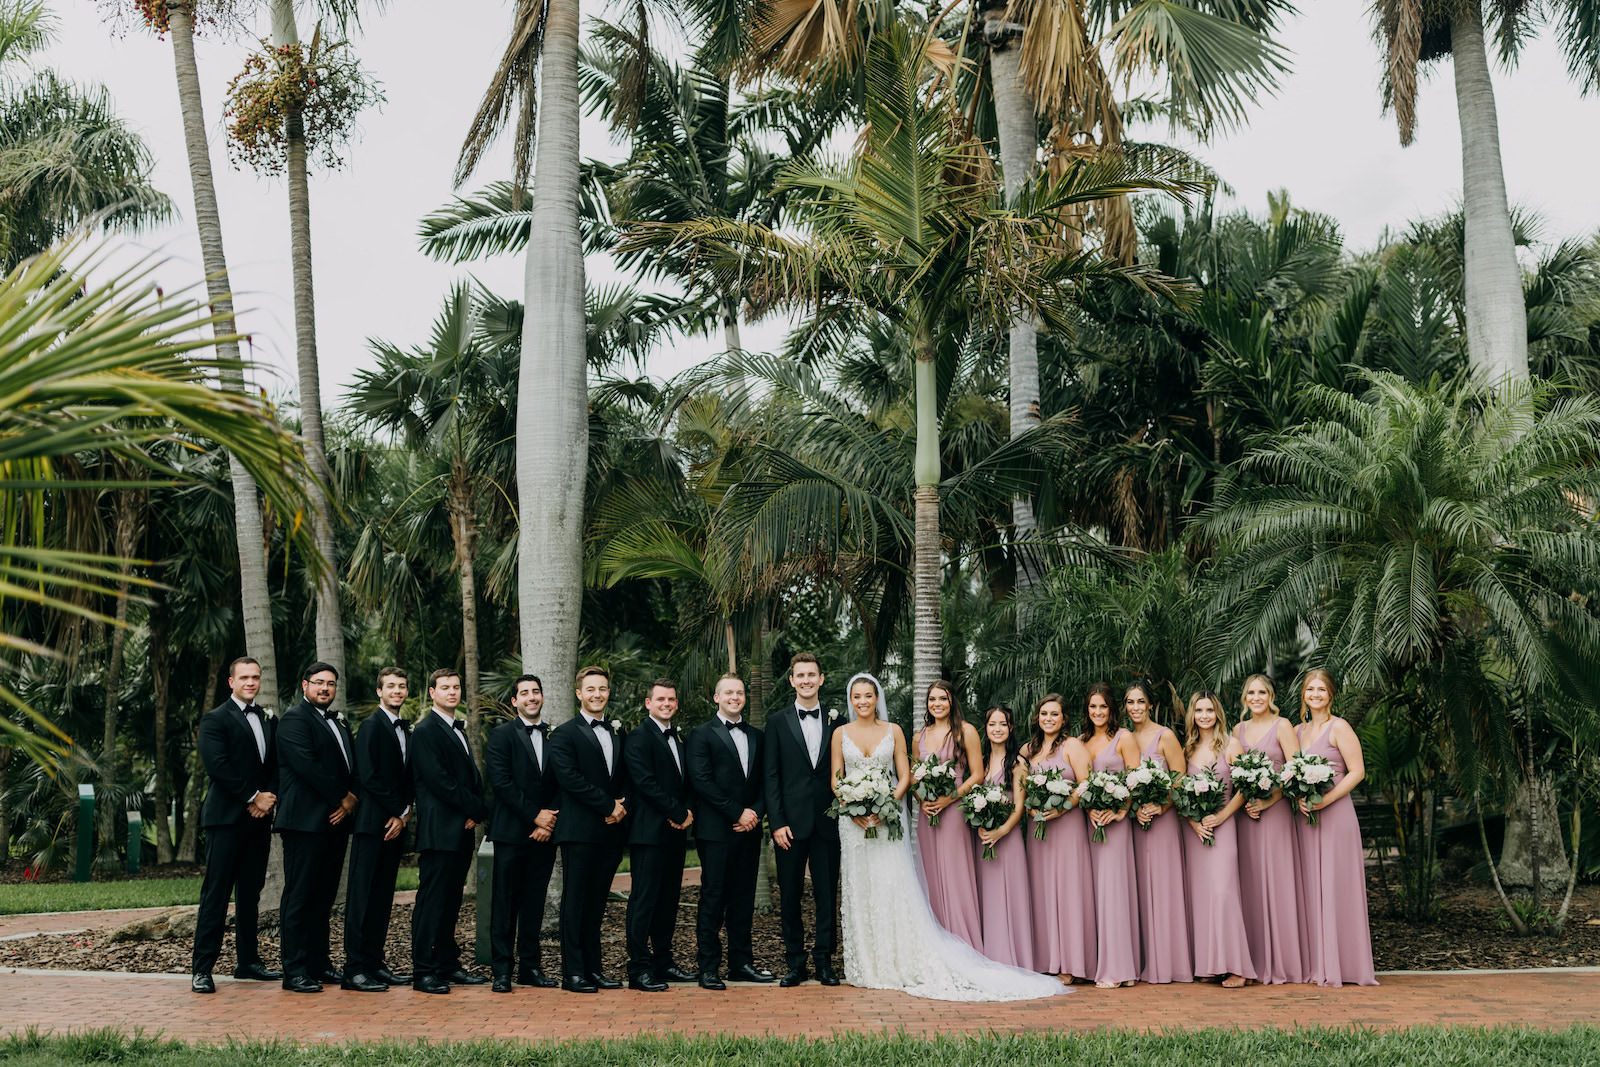 Tropical Wedding Party With Bridesmaids in Long Purple Dresses Wedding Portrait | Amber McWhorter Photography